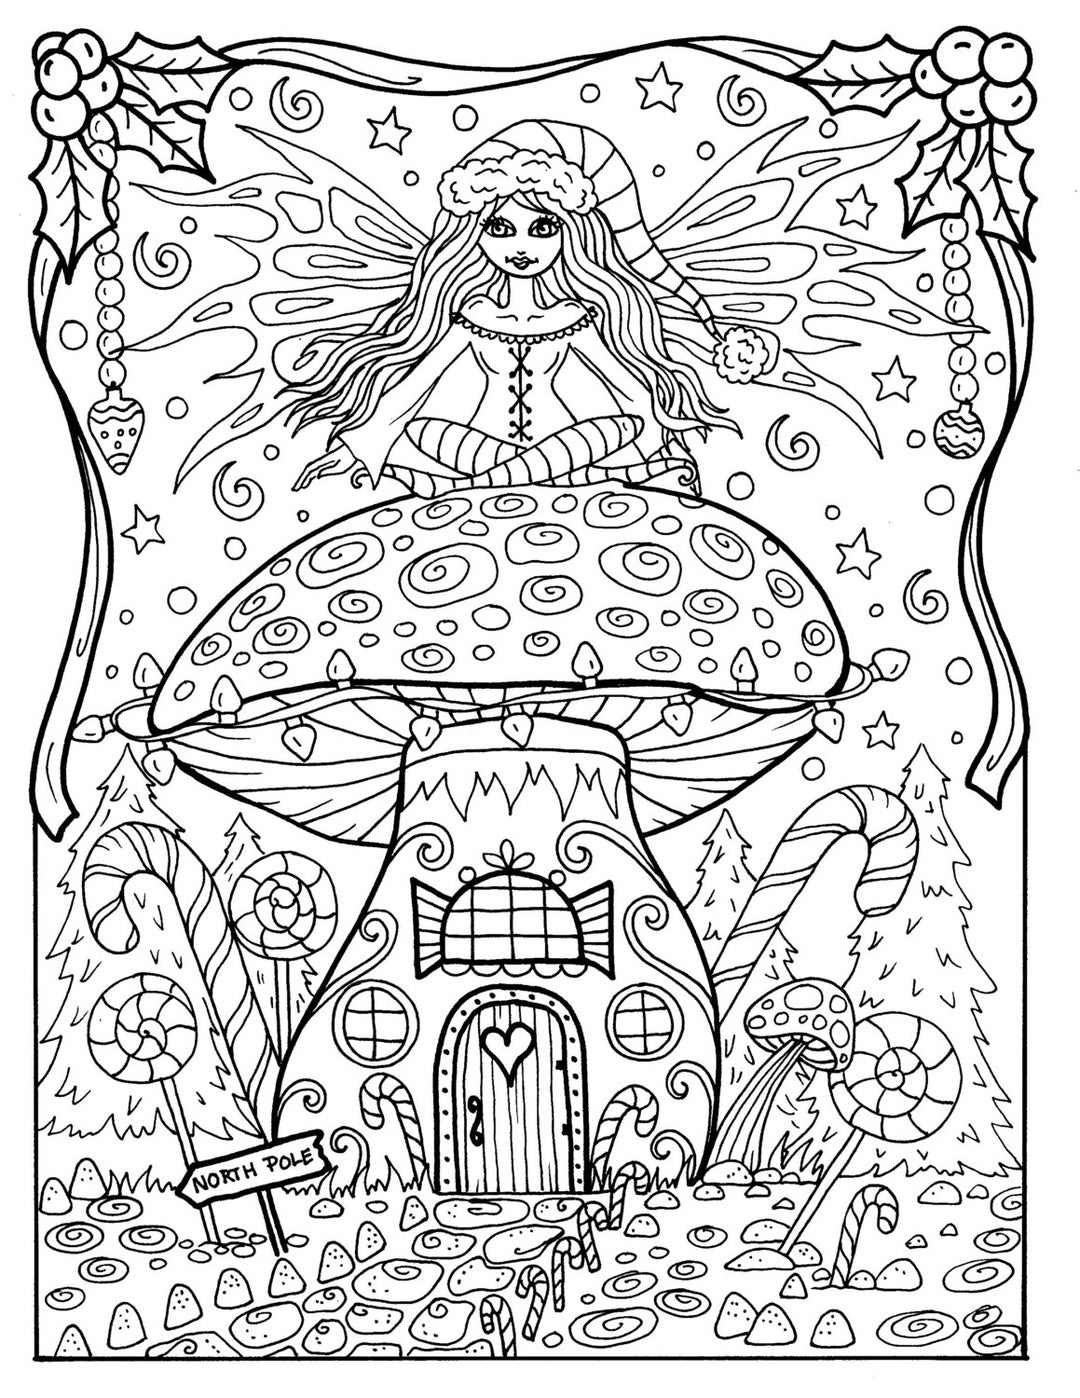  Just Doodle It - Fairy Houses: A Reverse Coloring Book For  Adults to Relax, Get Creative, and Have Fun With (Reverse Coloring Activity  Books for Adults and Kids): 9798390159415: Publishing, Lindenwood